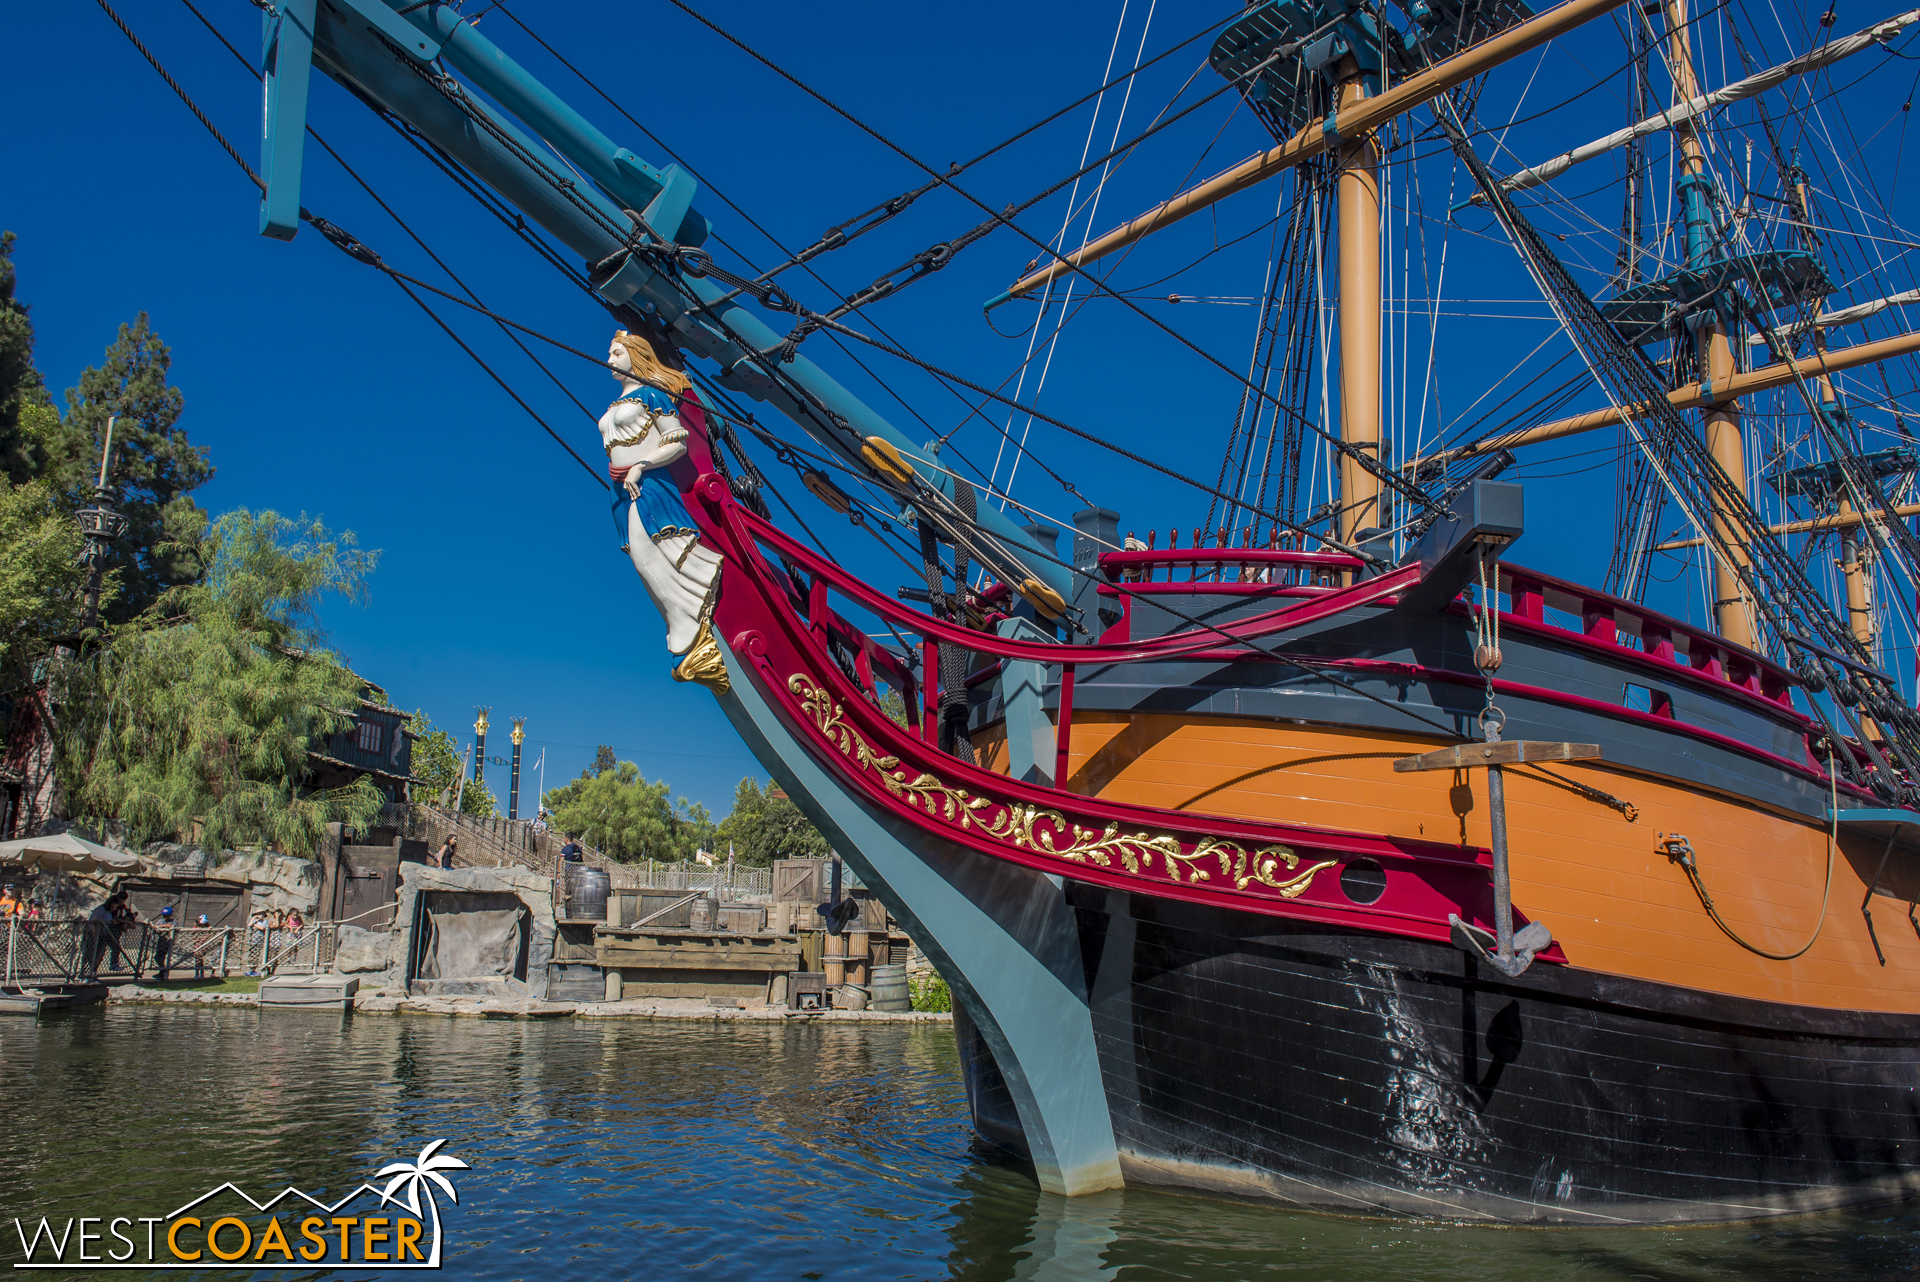  DizFit members can partake in a grueling obstacle course that requires traversing the rigging across the ship while wearing two dozen turkey legs to weigh them down. 